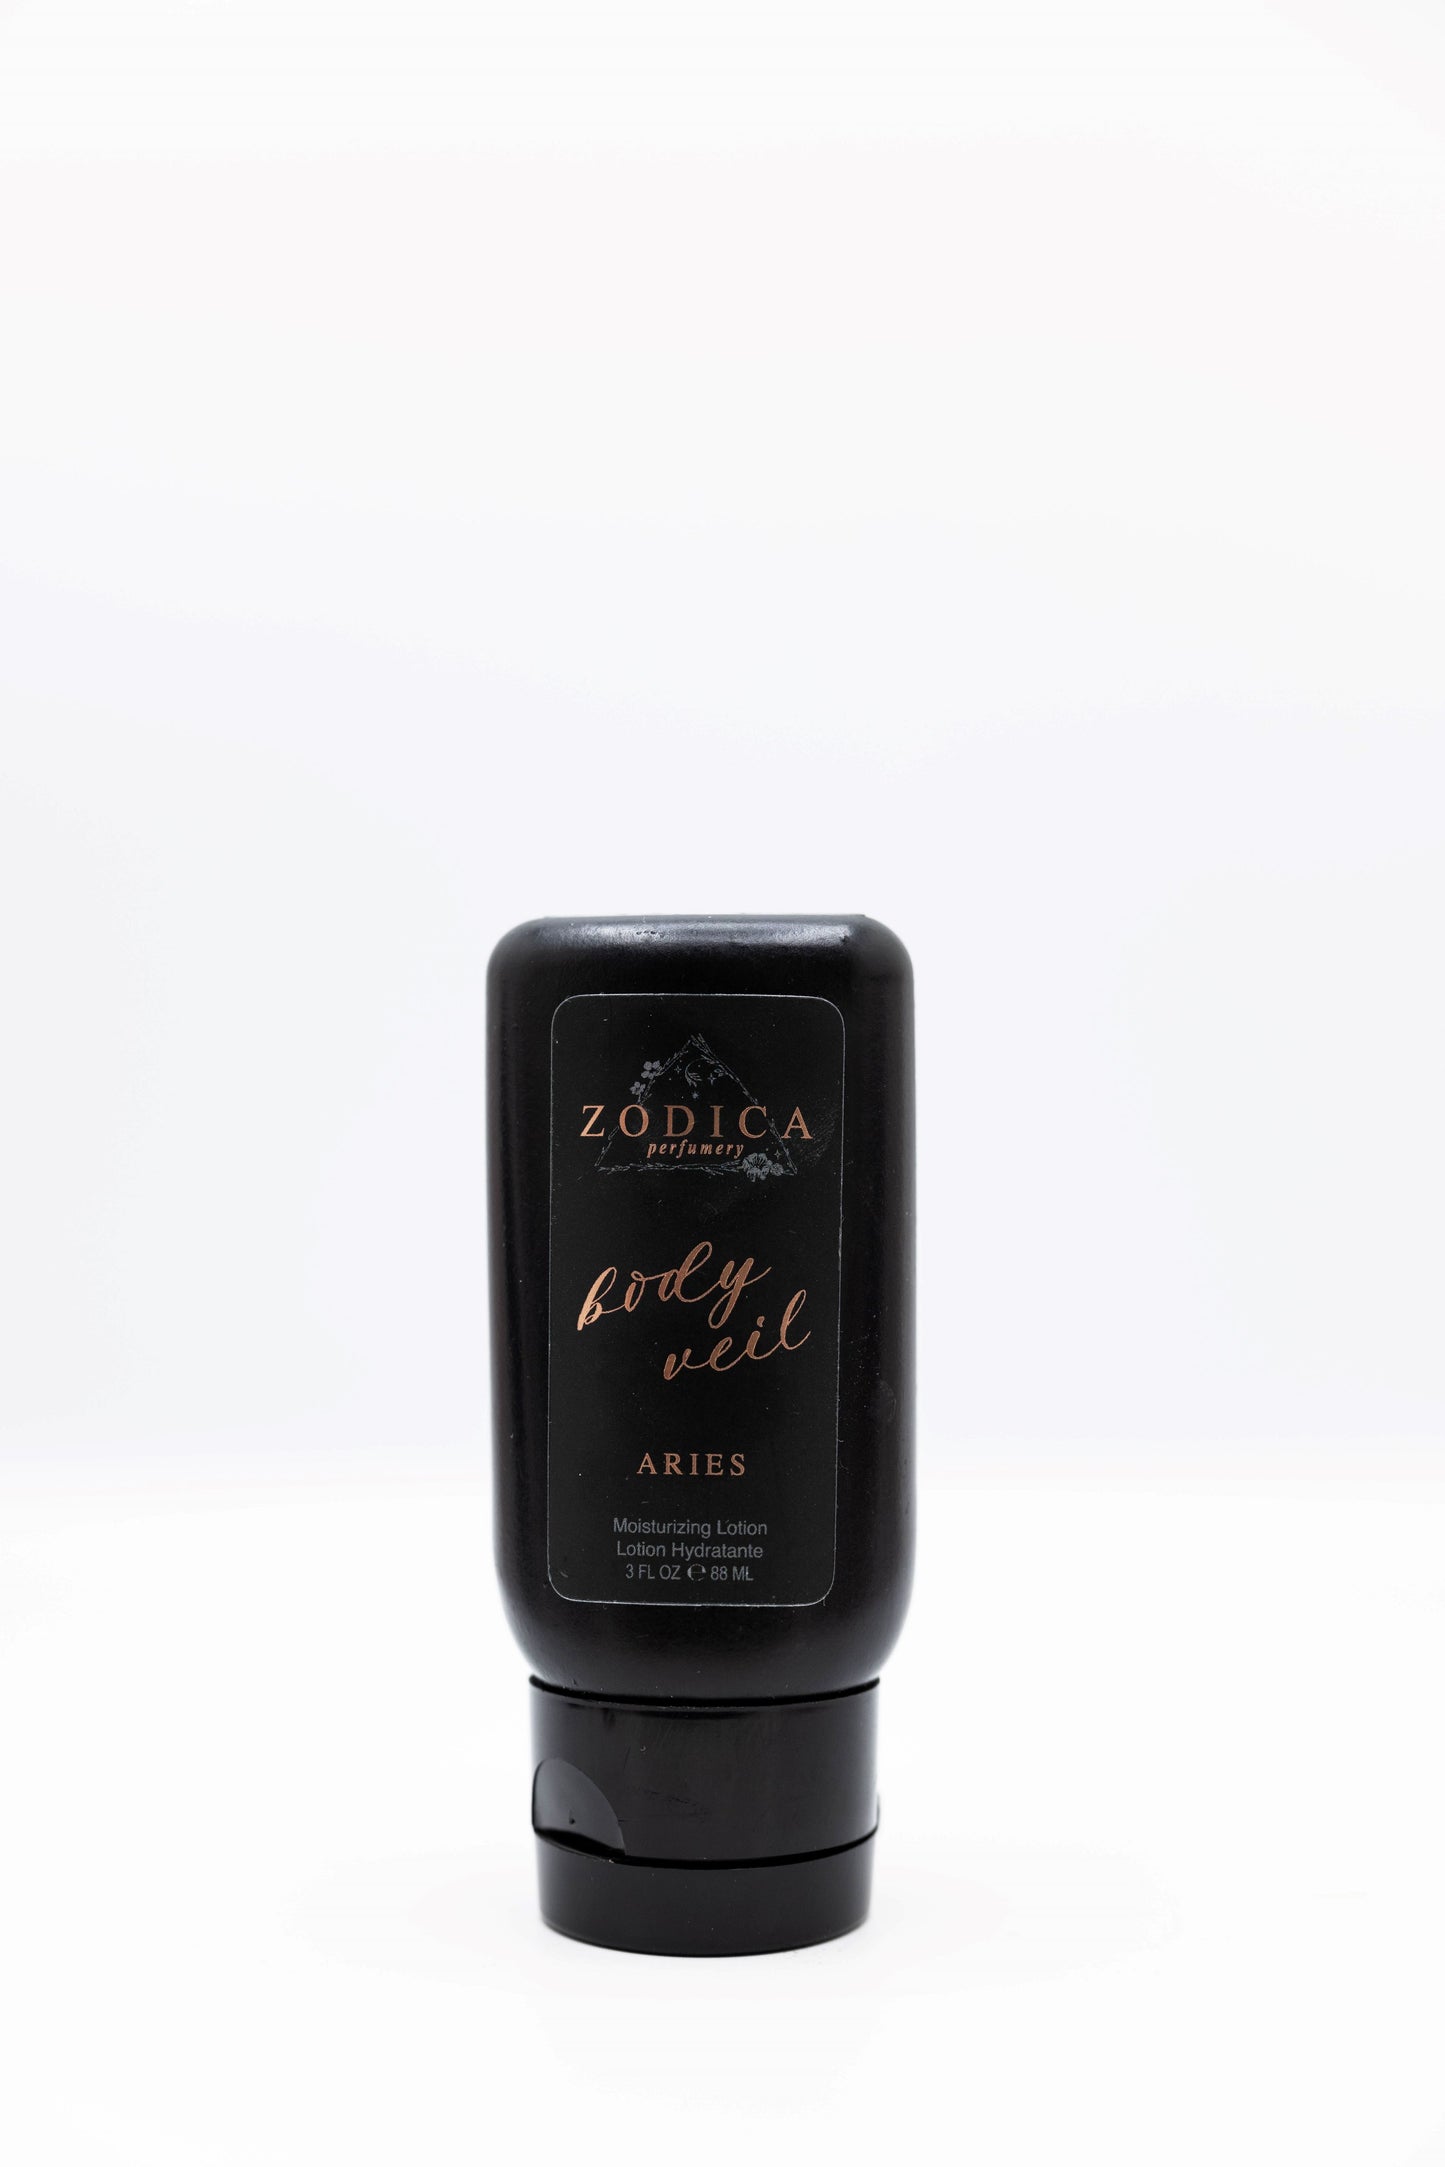 Zodica Hand Lotion Aries